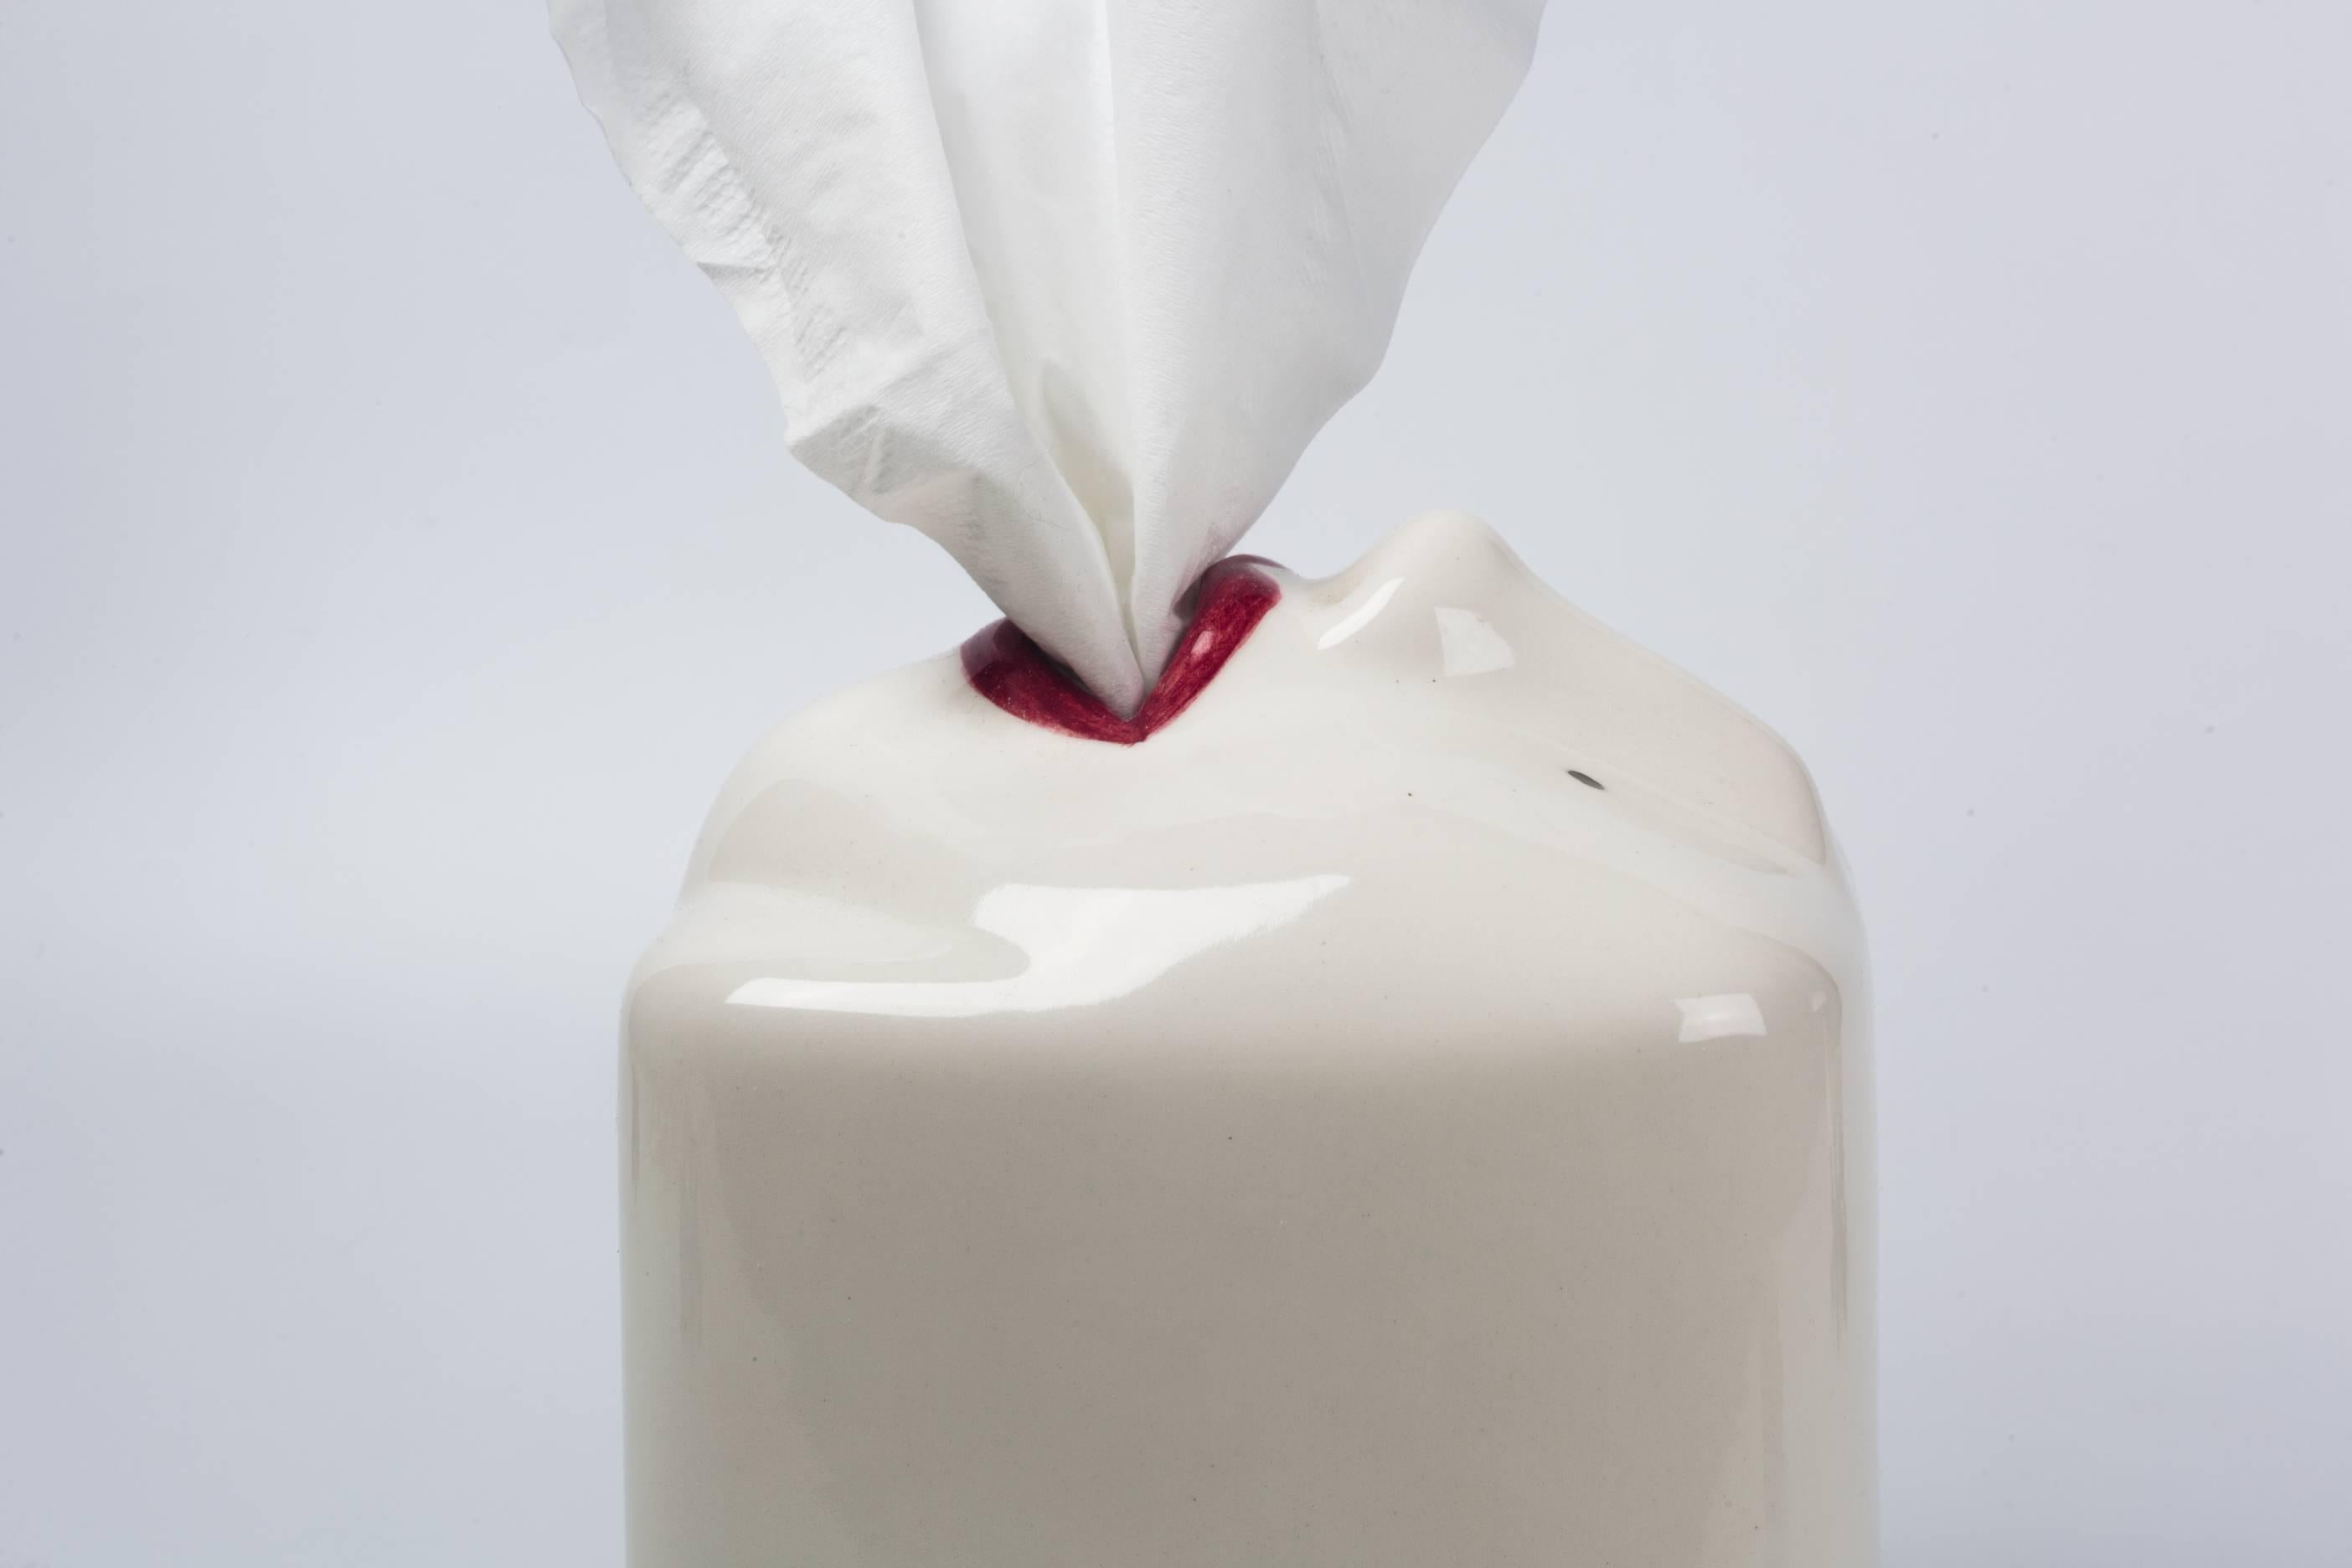 Post-Modern Ceramic White Tissue Box with Face and Mouth Ouverture